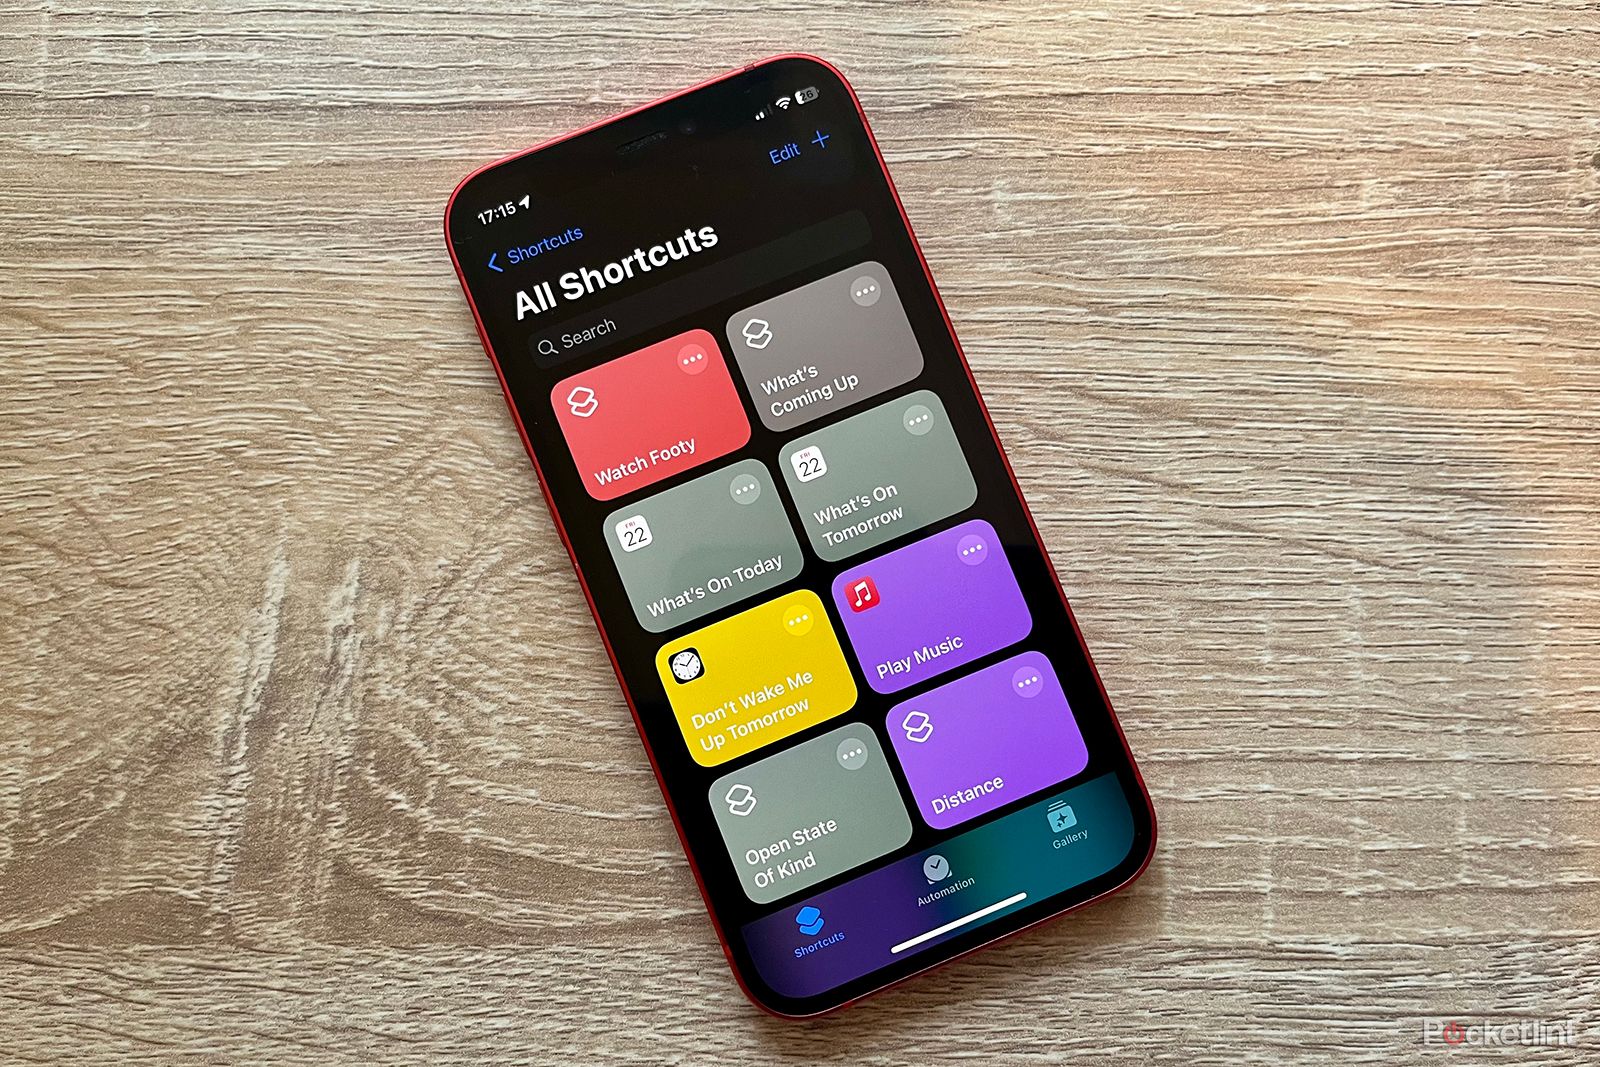 15 tips for the Shortcuts app you really need to know